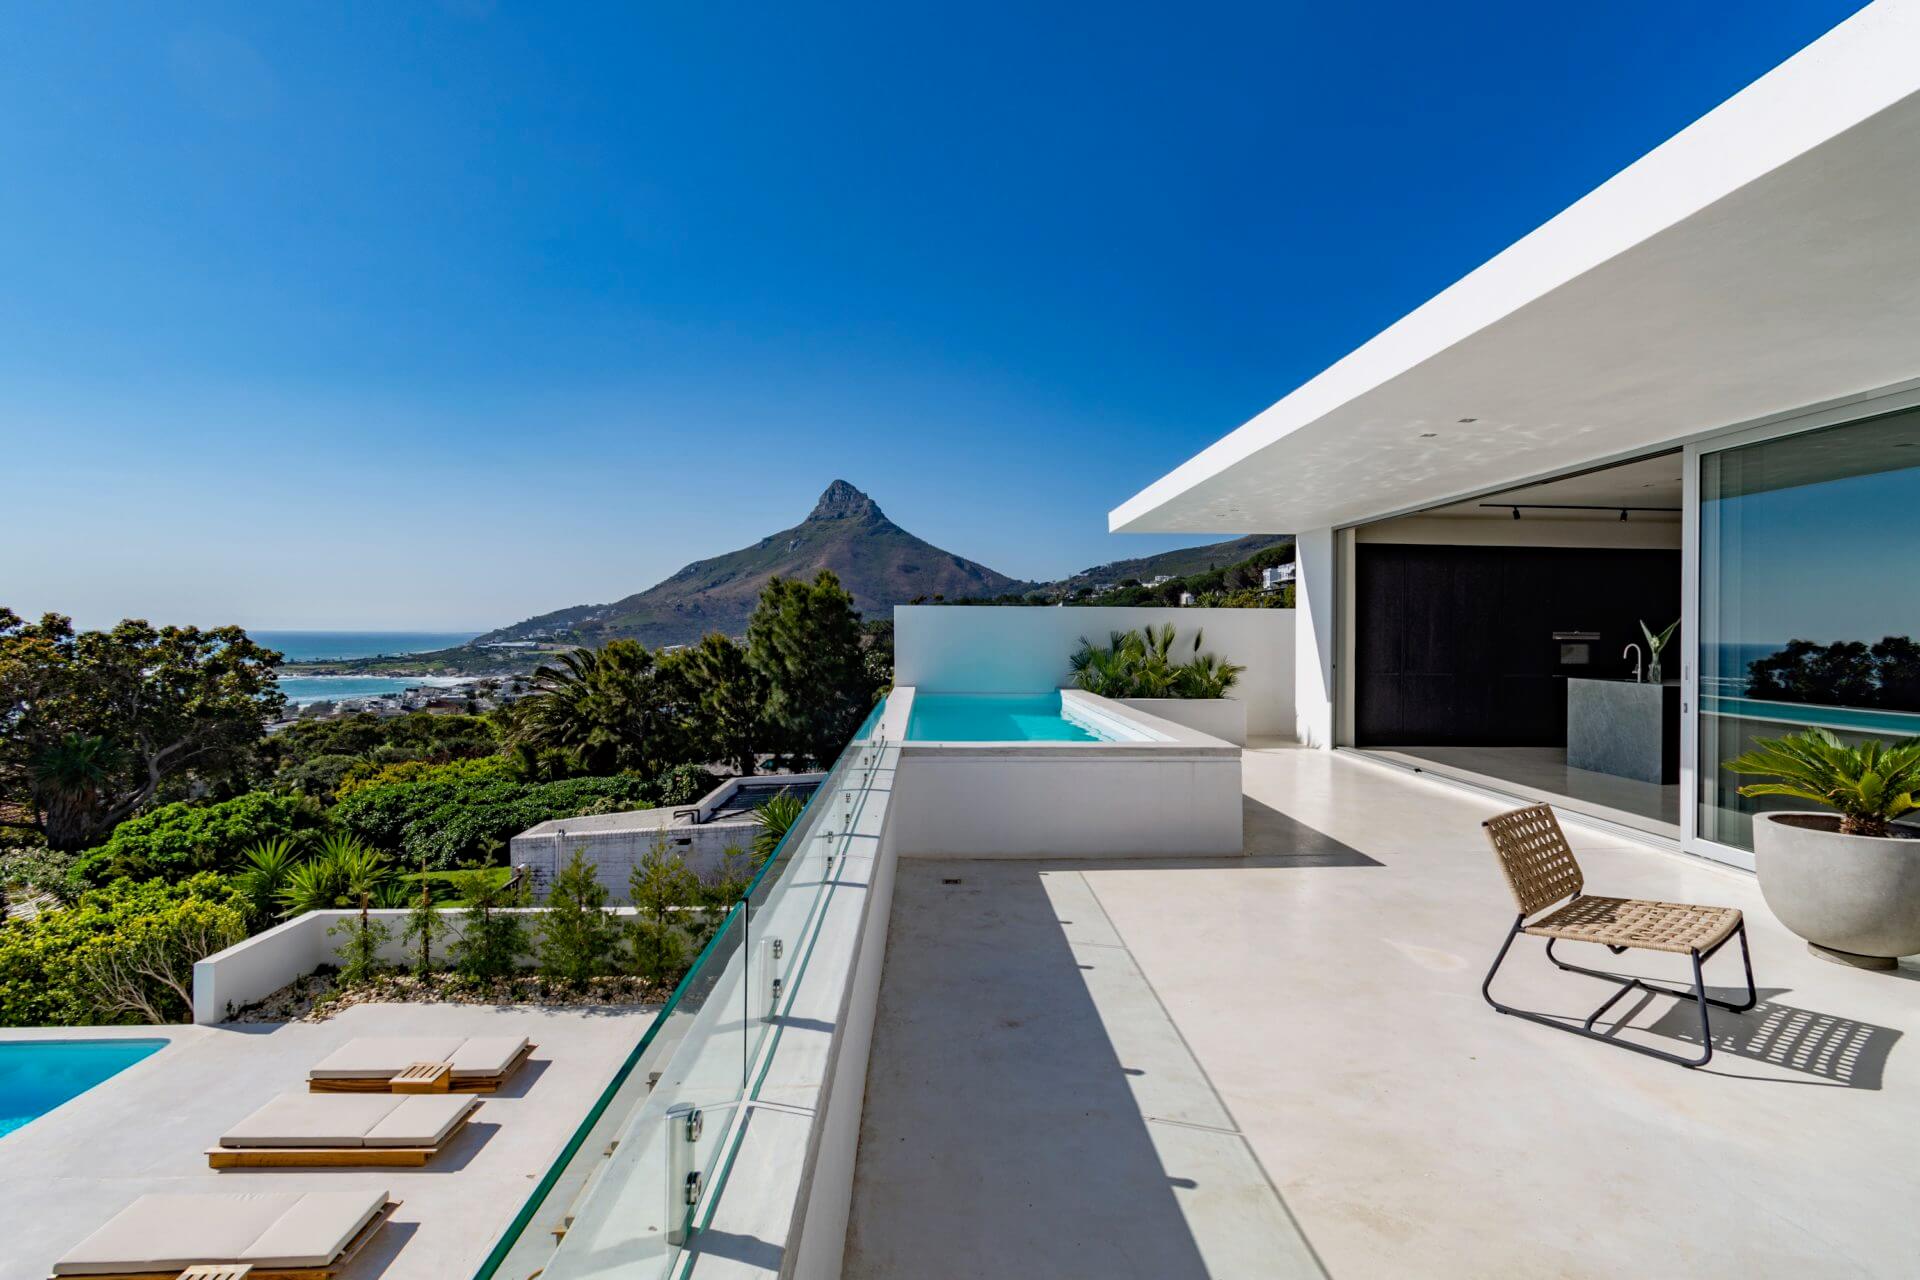 Photo 29 of Villa Ibiza accommodation in Camps Bay, Cape Town with 8 bedrooms and 8 bathrooms